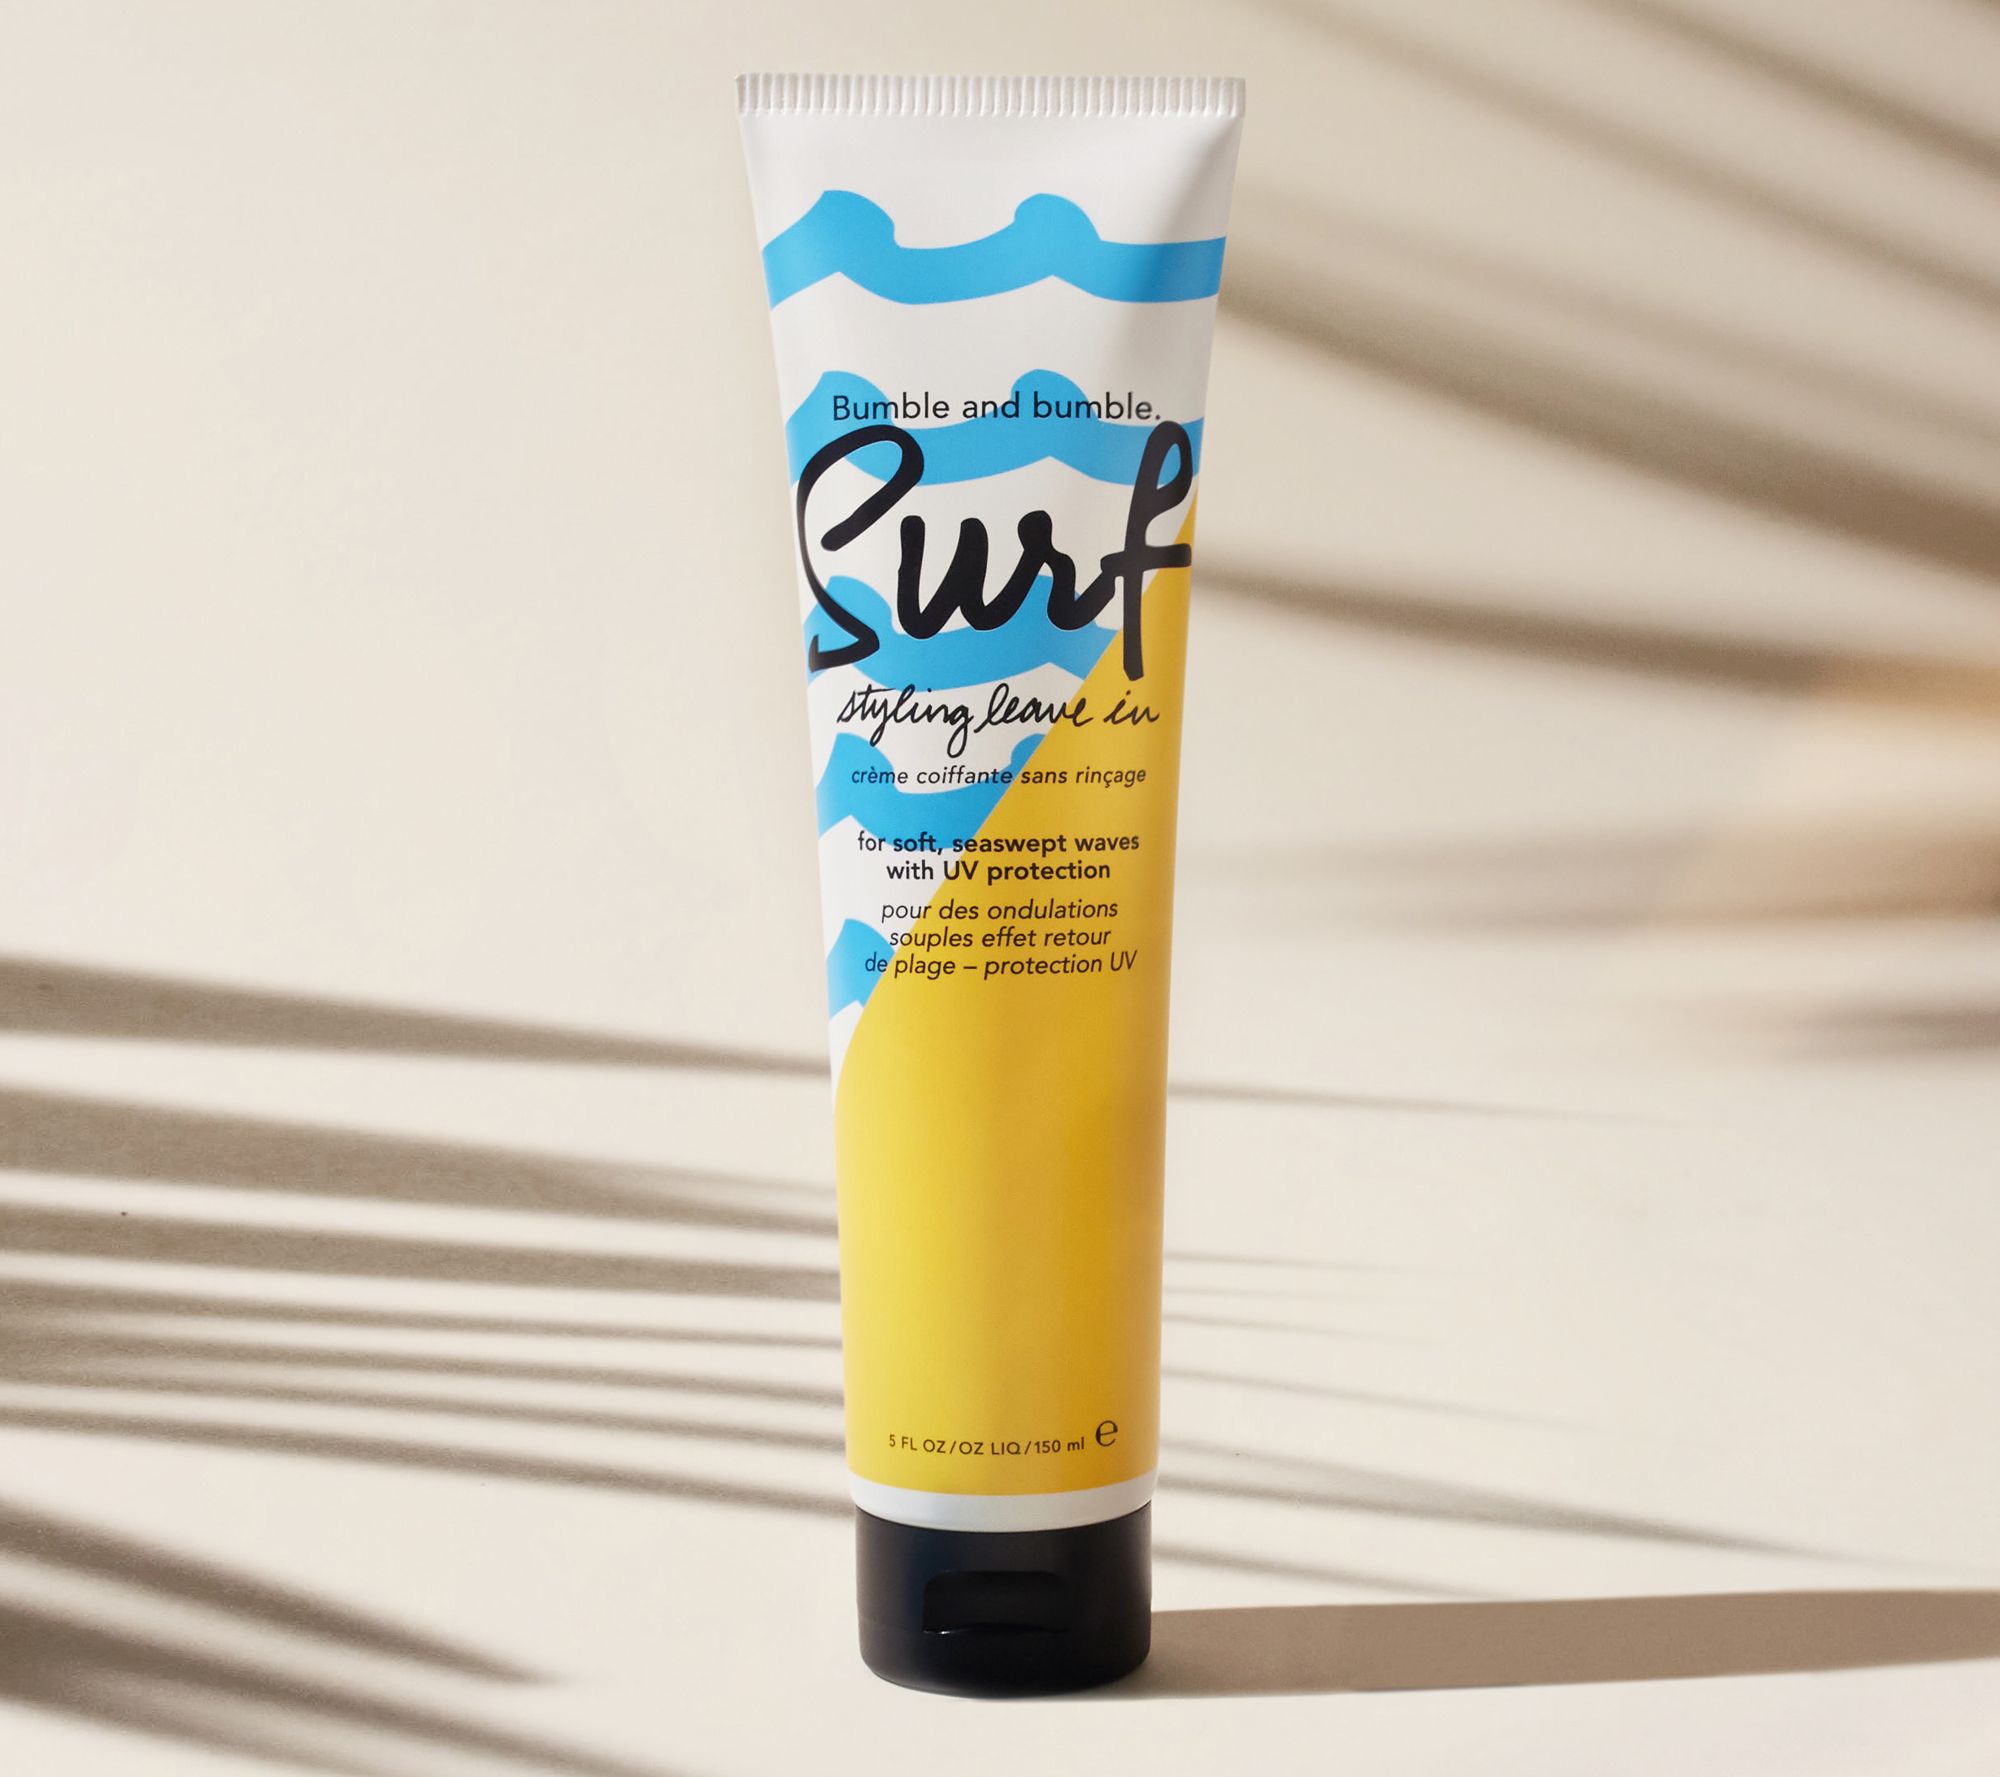 Bumble and bumble. Surf Spray & Surf Styling Leve-In Set 